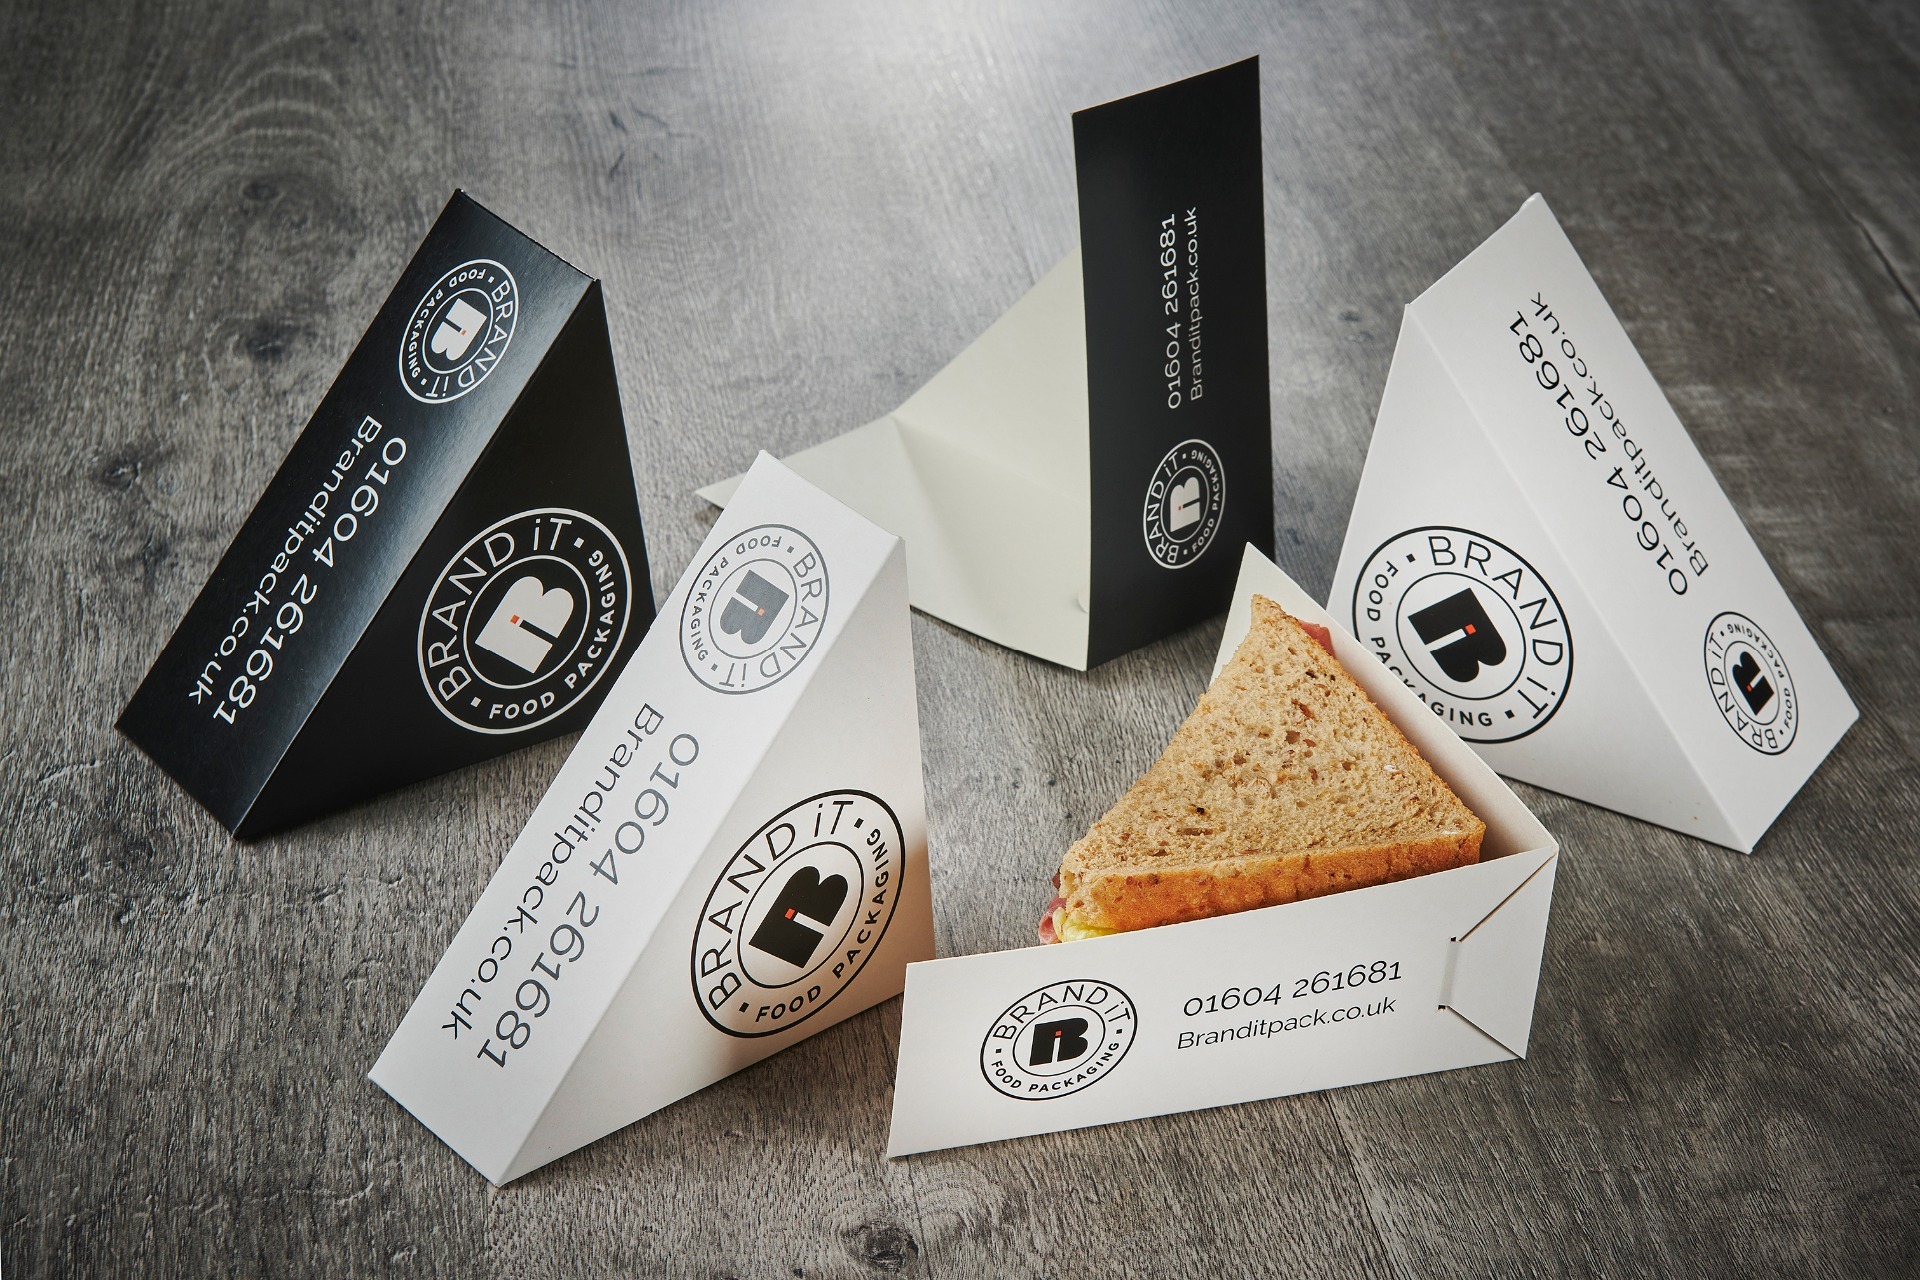 Branded flat pack sandwich boxes